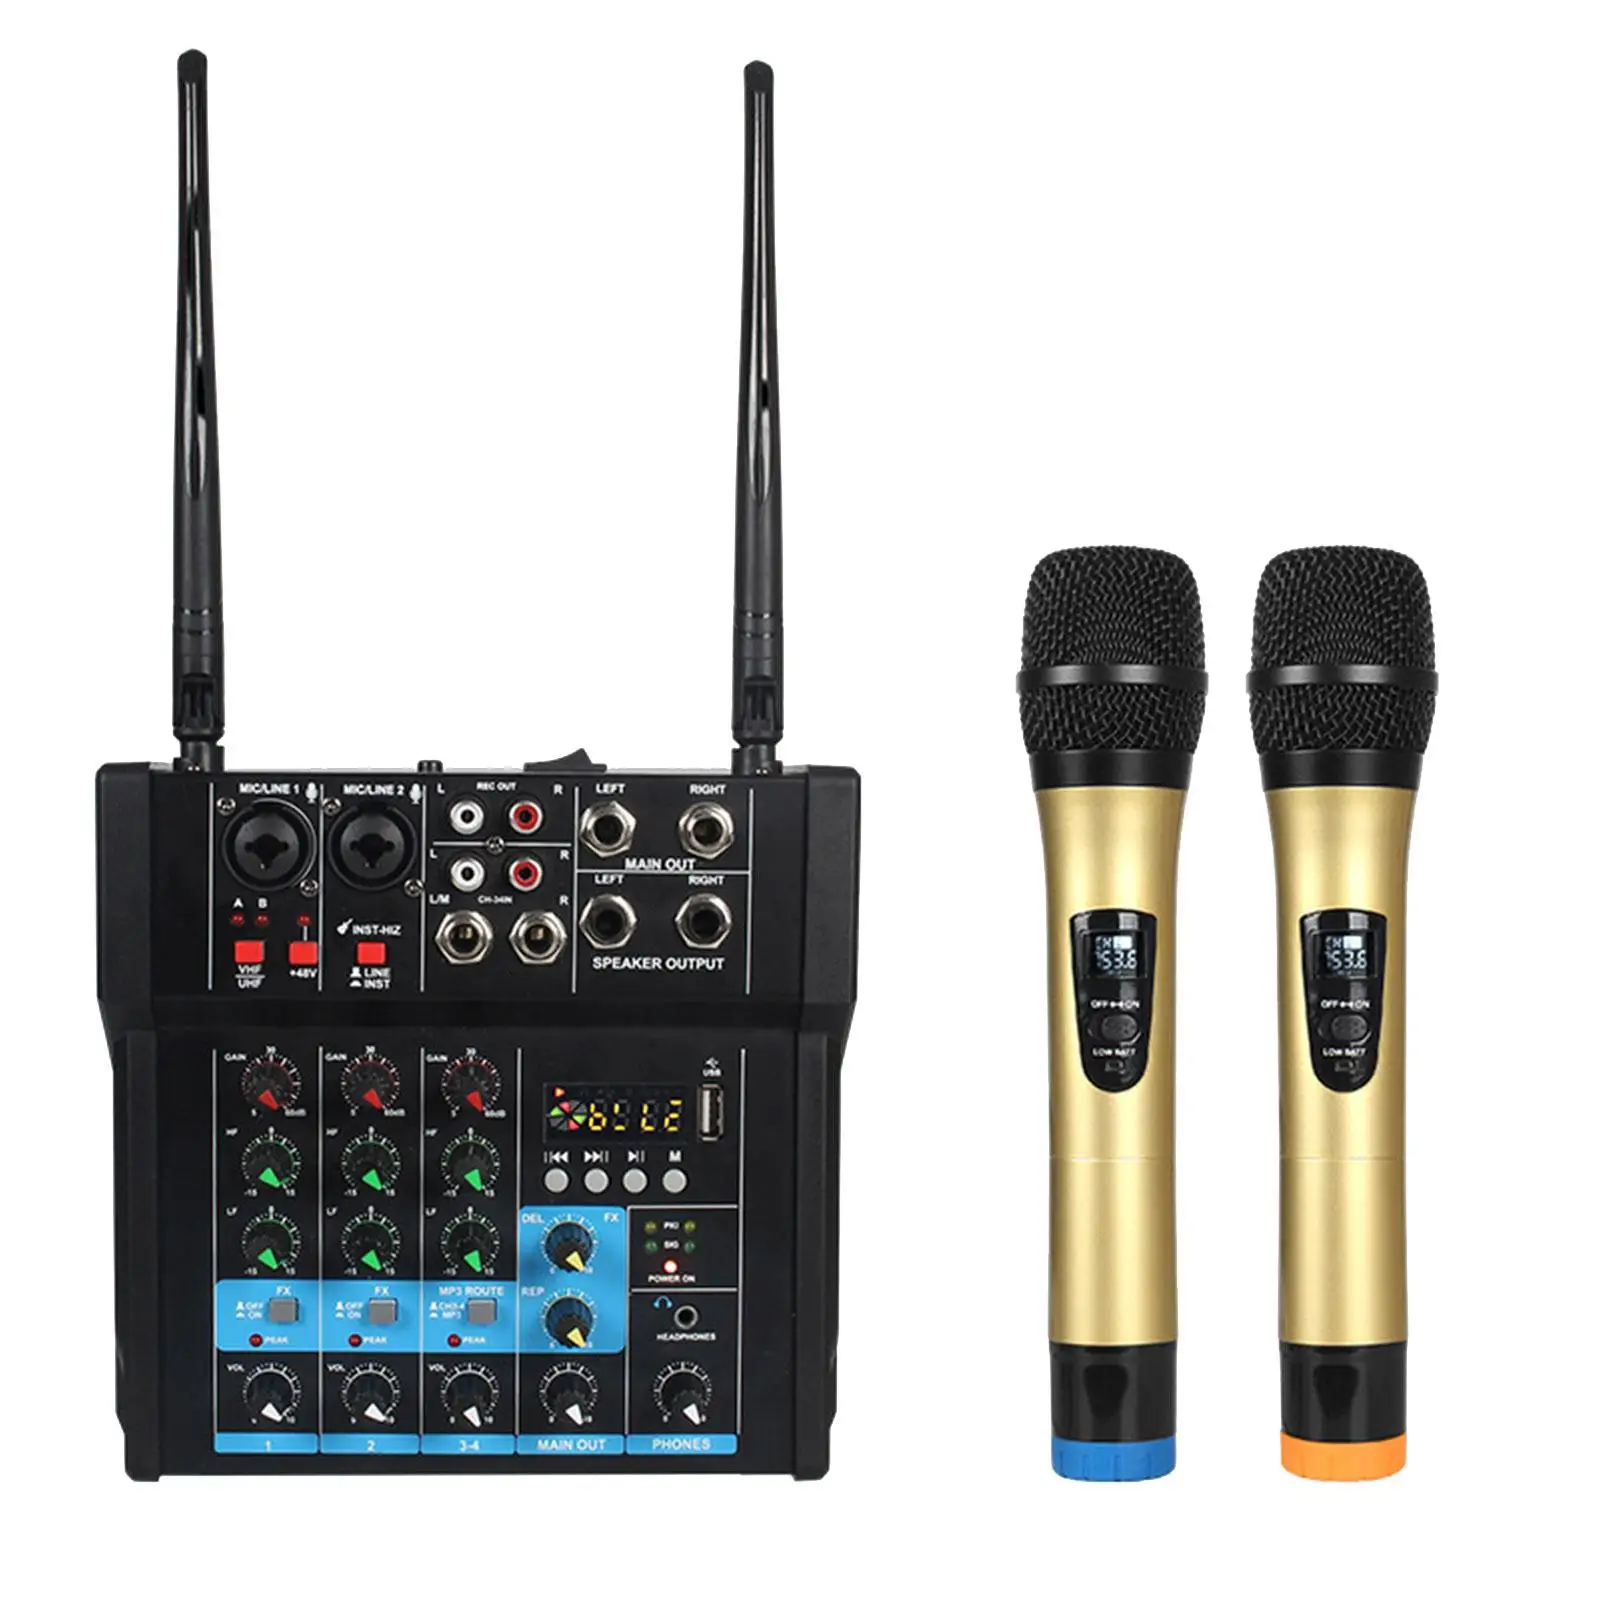 Audio Mixer with Dual Wireless Microphones USB MP3 Bluetooth DJ Mixer Sound Mixer for PC Recording Party Karaoke Live Streaming